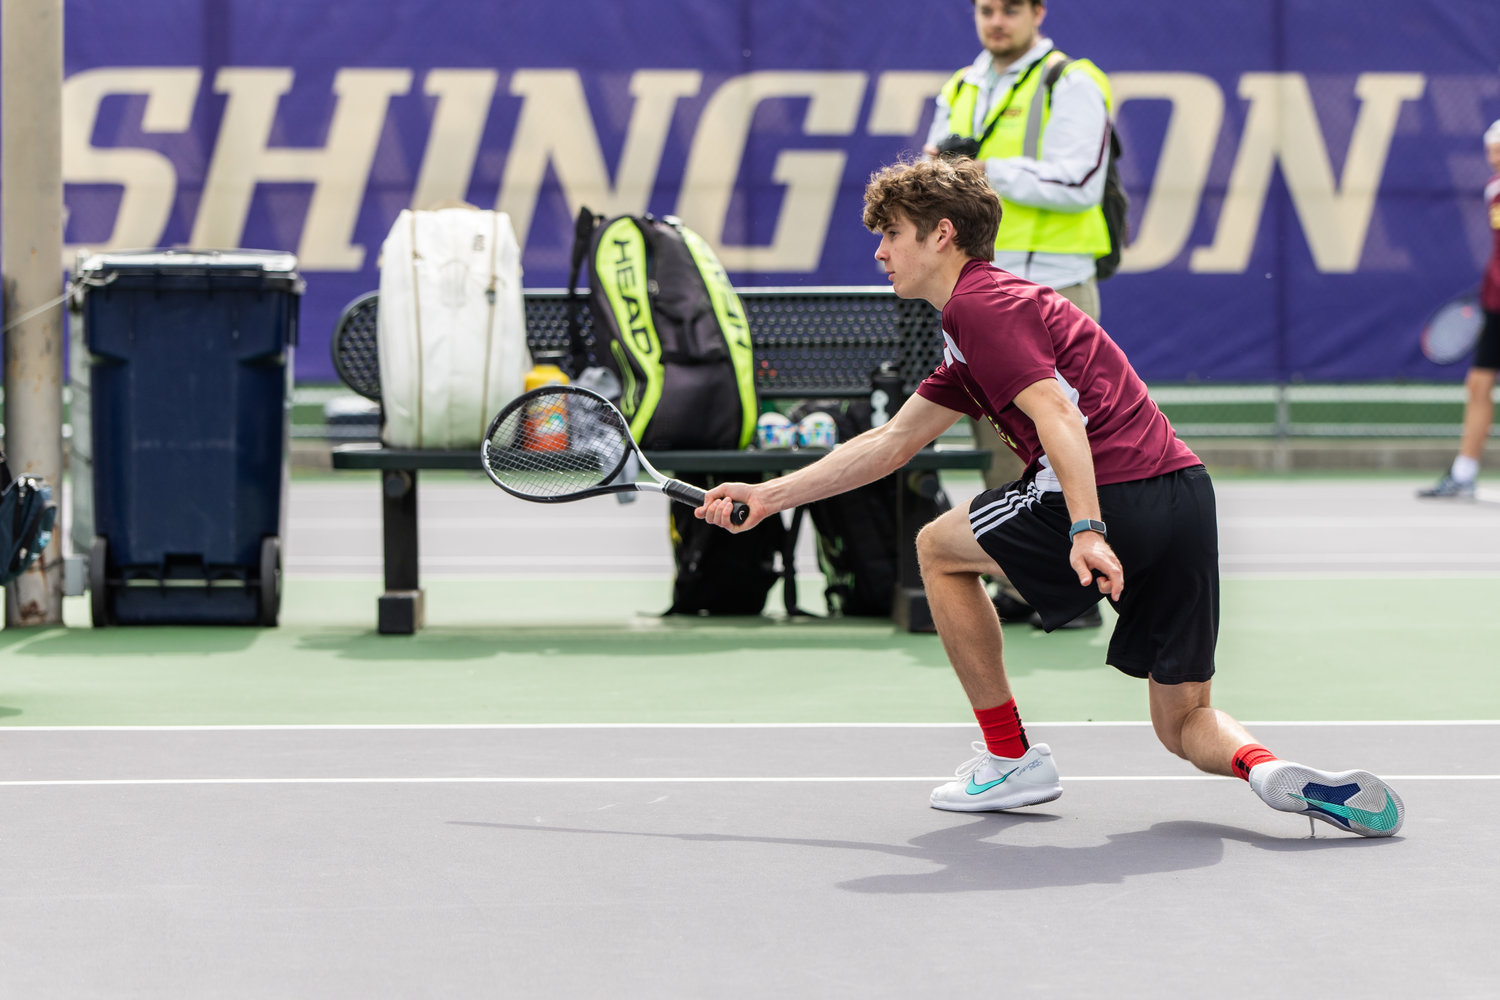 W.F. West's Aaron Boggess stretches forward to make contact with the ball during the first set of the 2A boys' doubles tennis state competition on May 27, 2022.